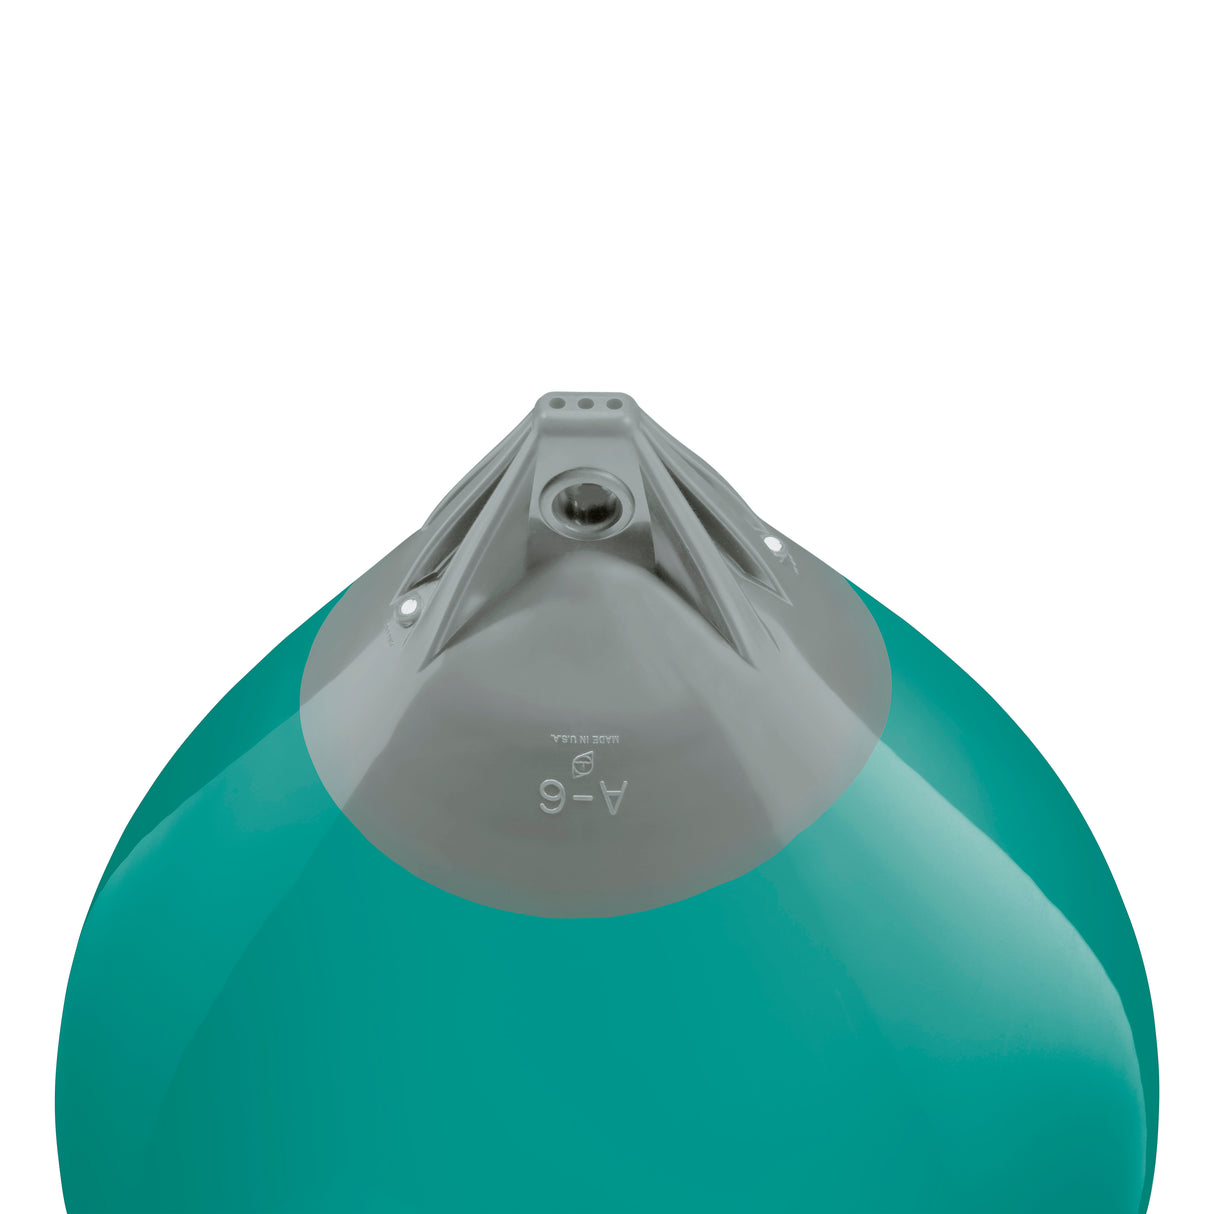 Teal buoy with Grey-Top, Polyform A-6 angled shot